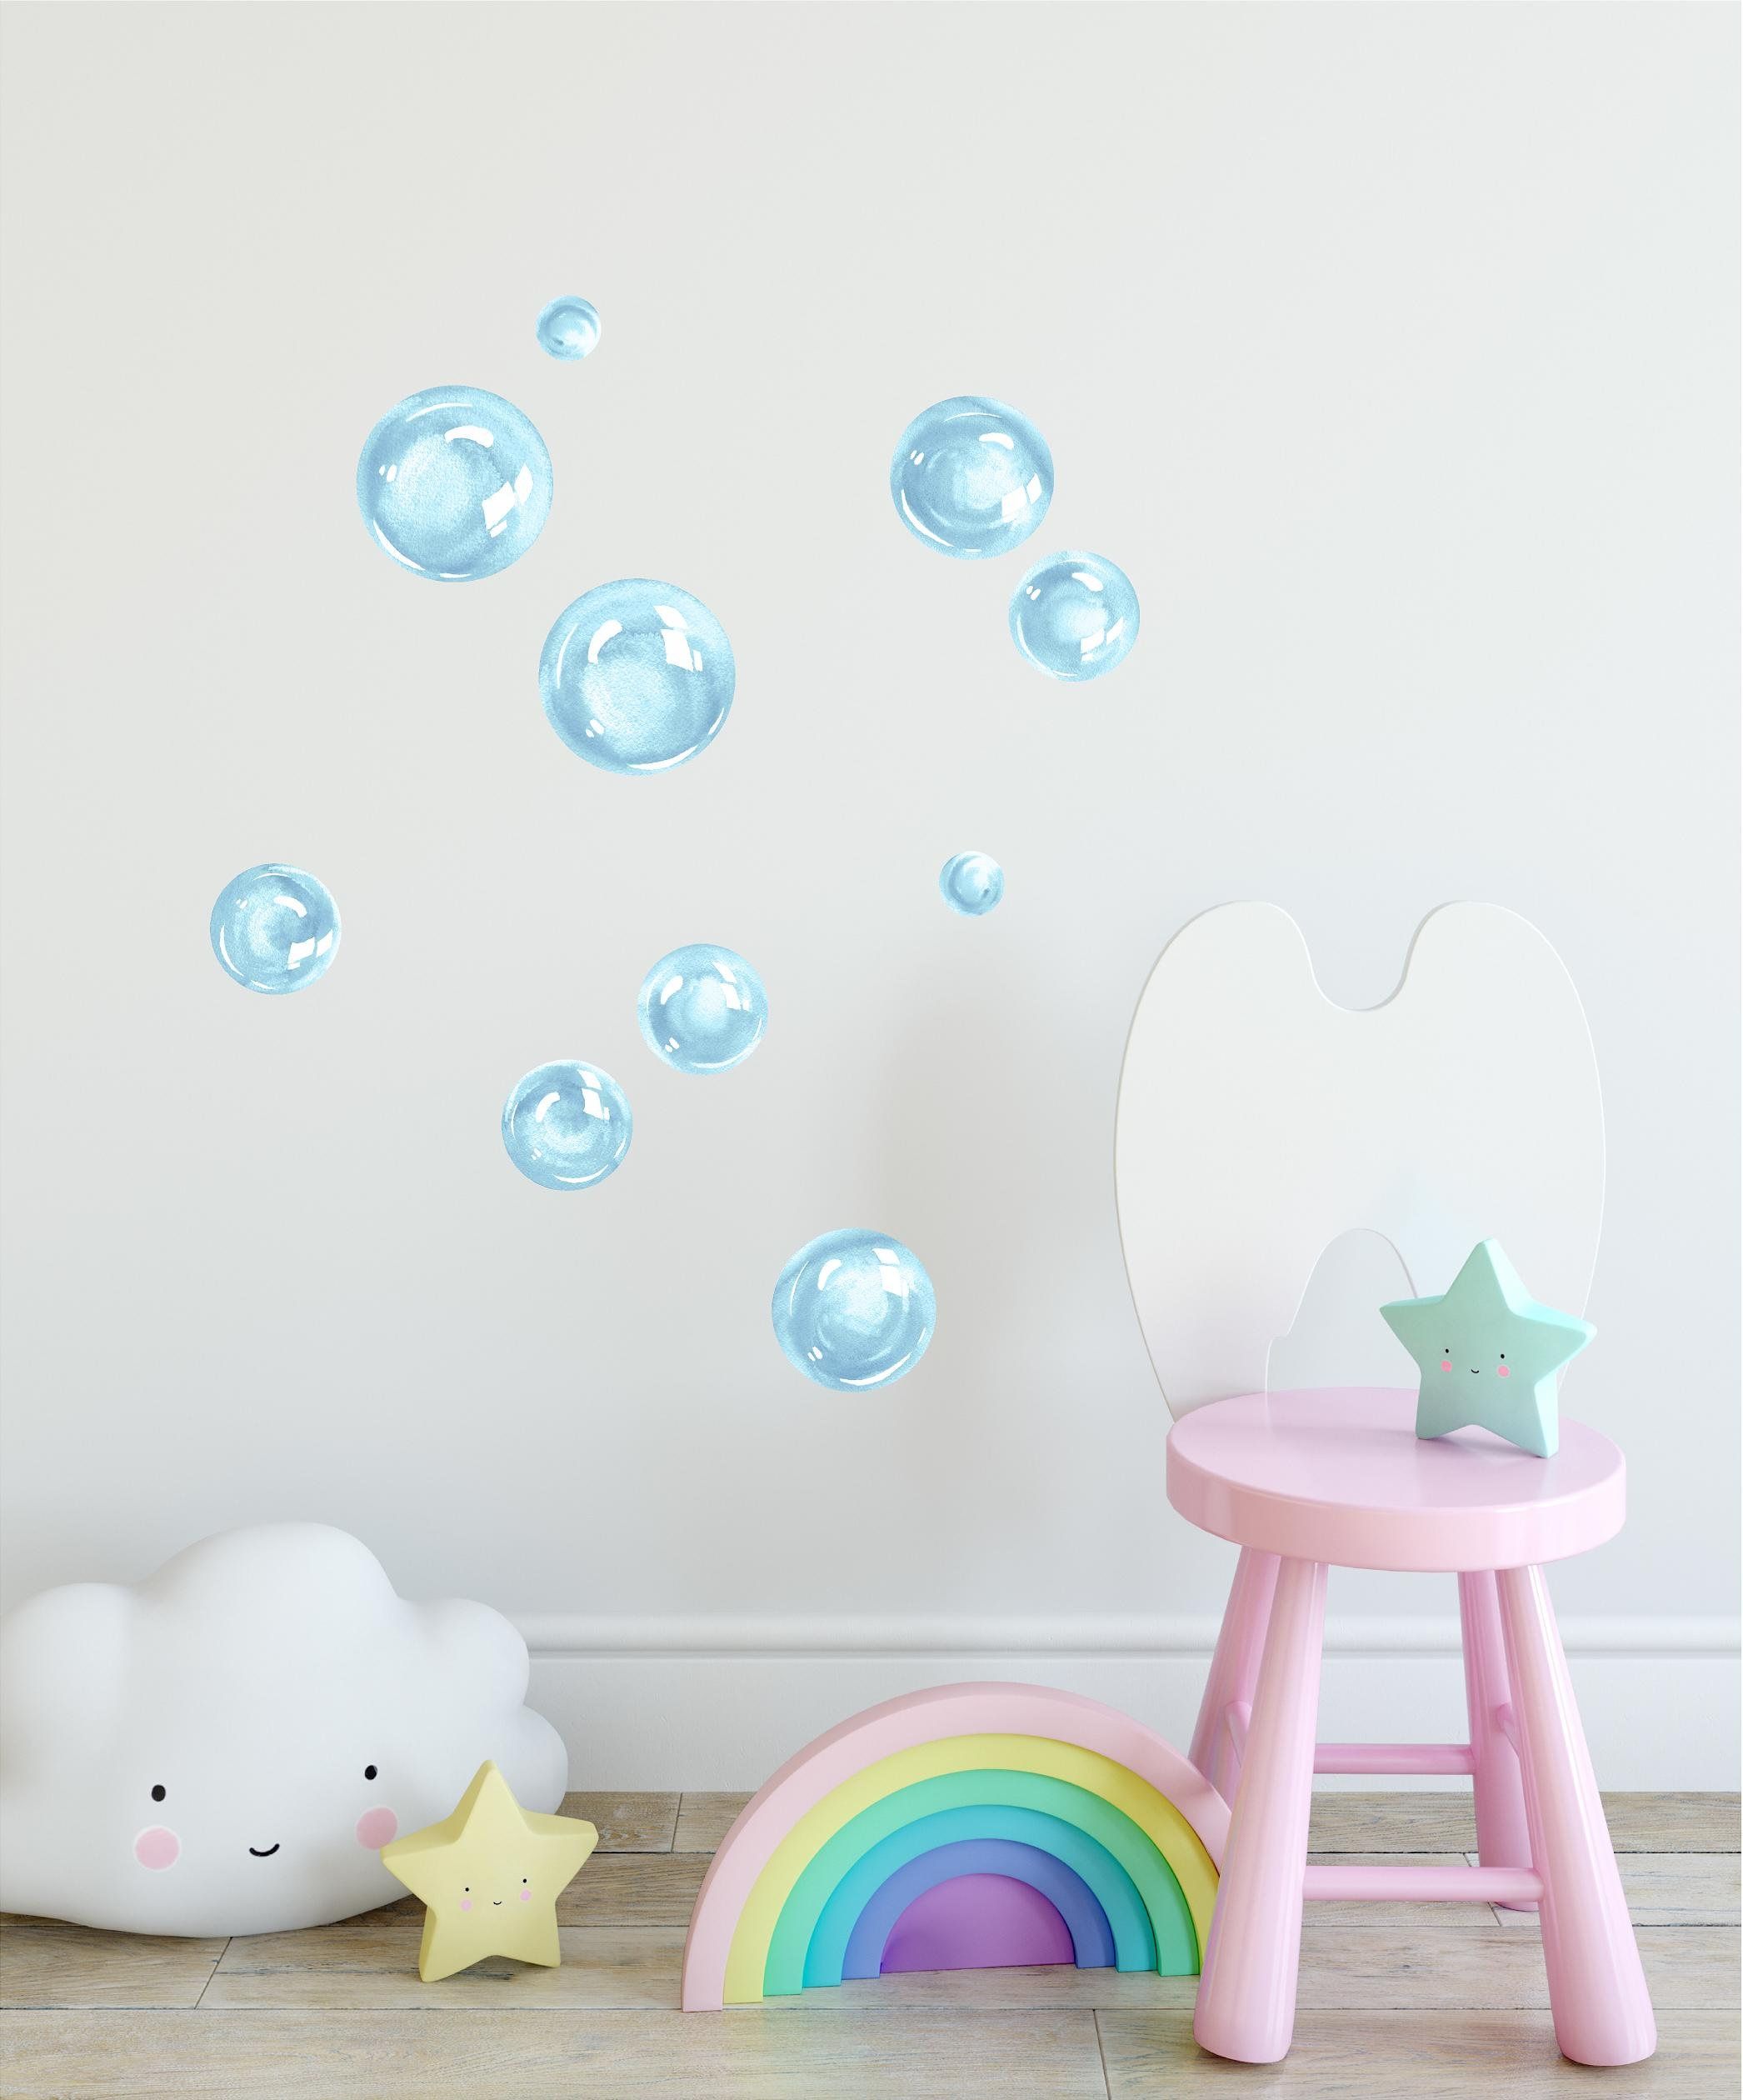 Watercolor Blue Bubbles Wall Decal Set Ocean Sea Bubble Fabric – Etsy With Best And Newest Bubble Wall Art (View 5 of 20)